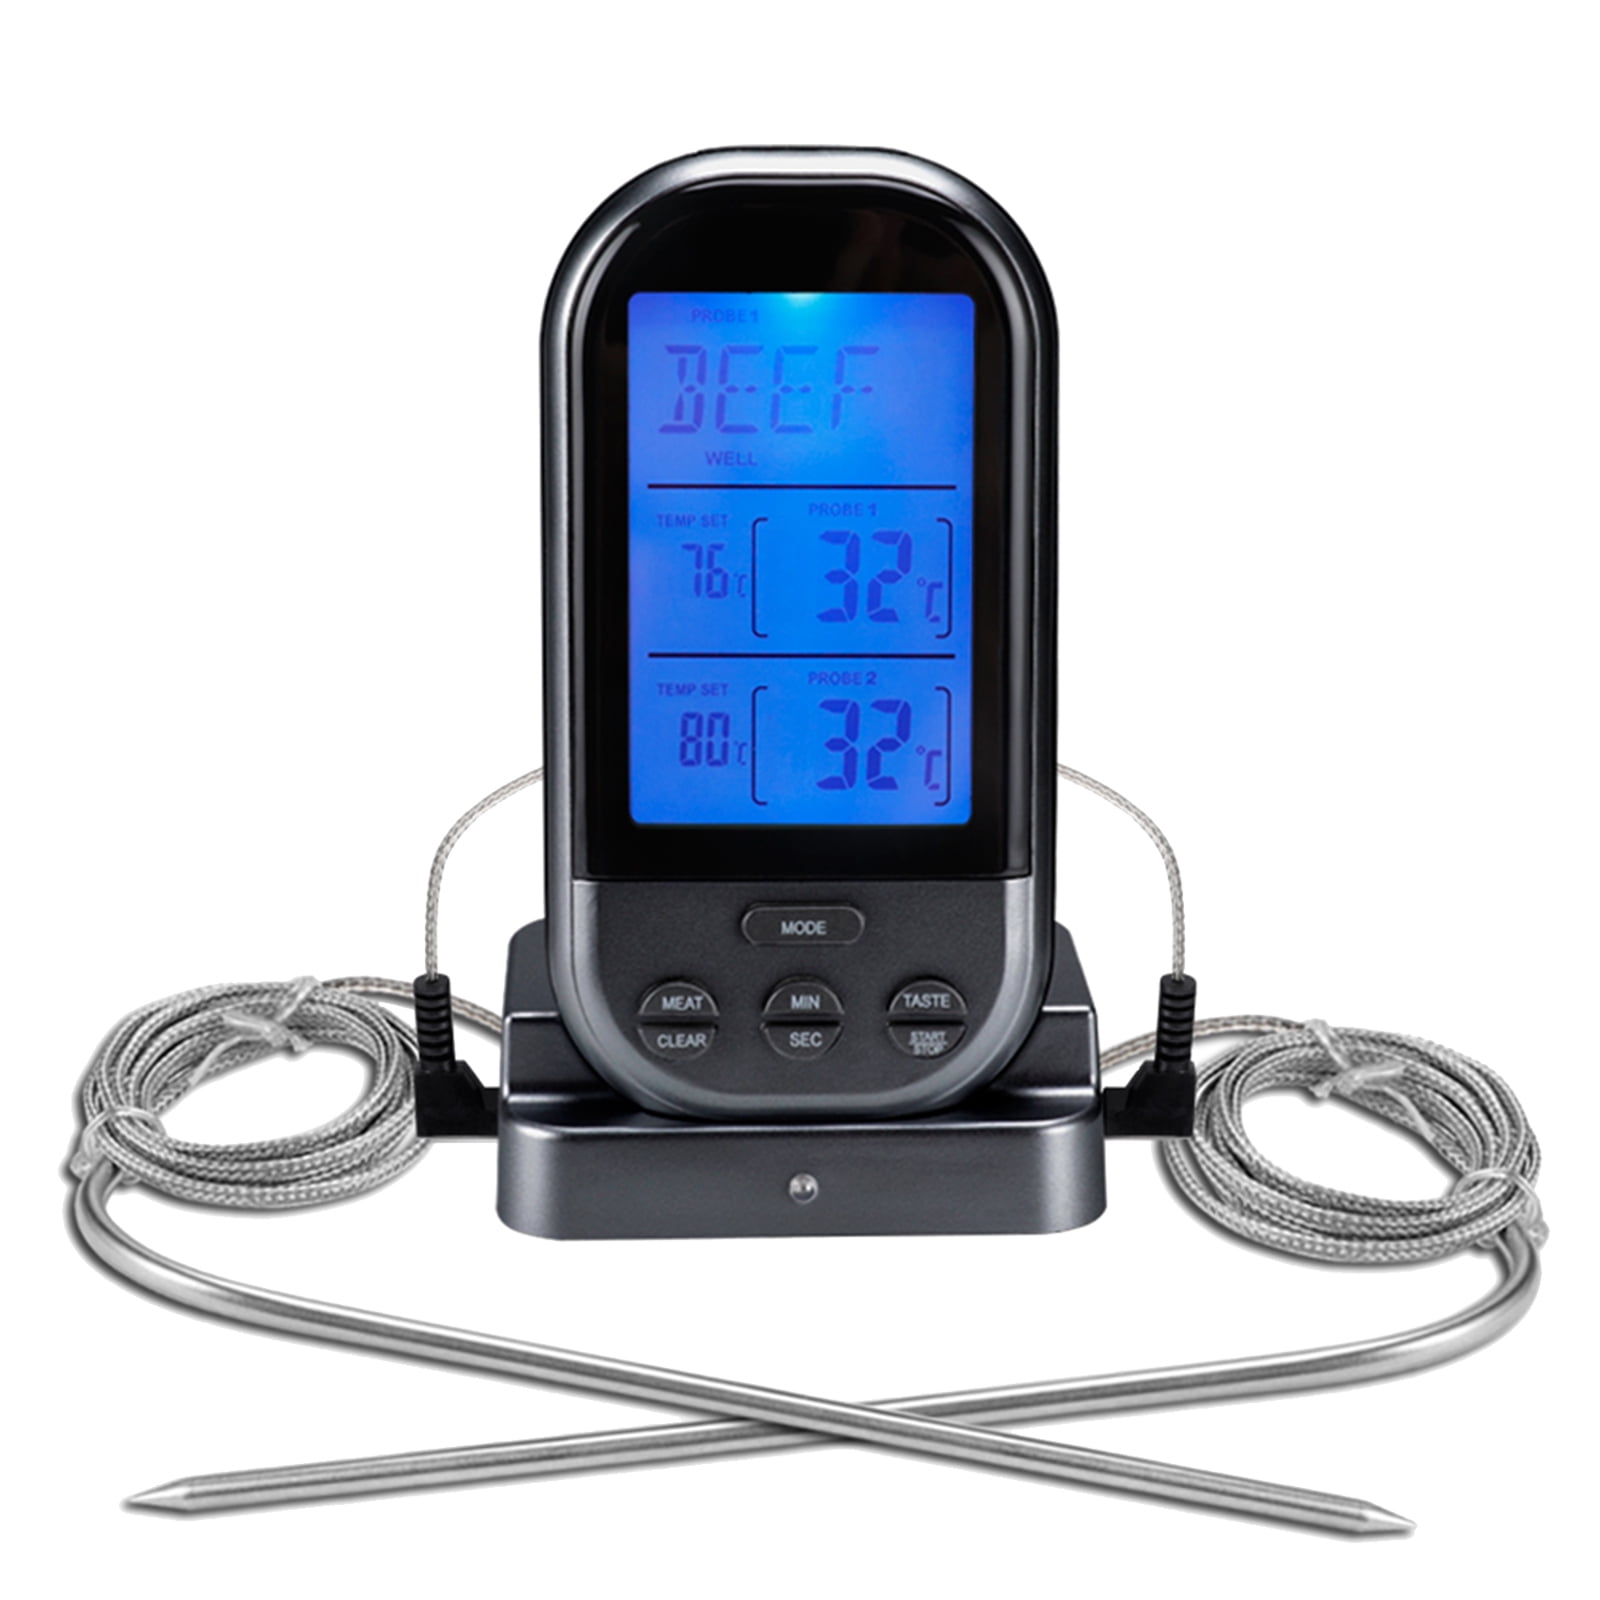 2 In1 Digital Wireless Remote Probes Meat Oven Thermometer Smoker Grill BBQ Food